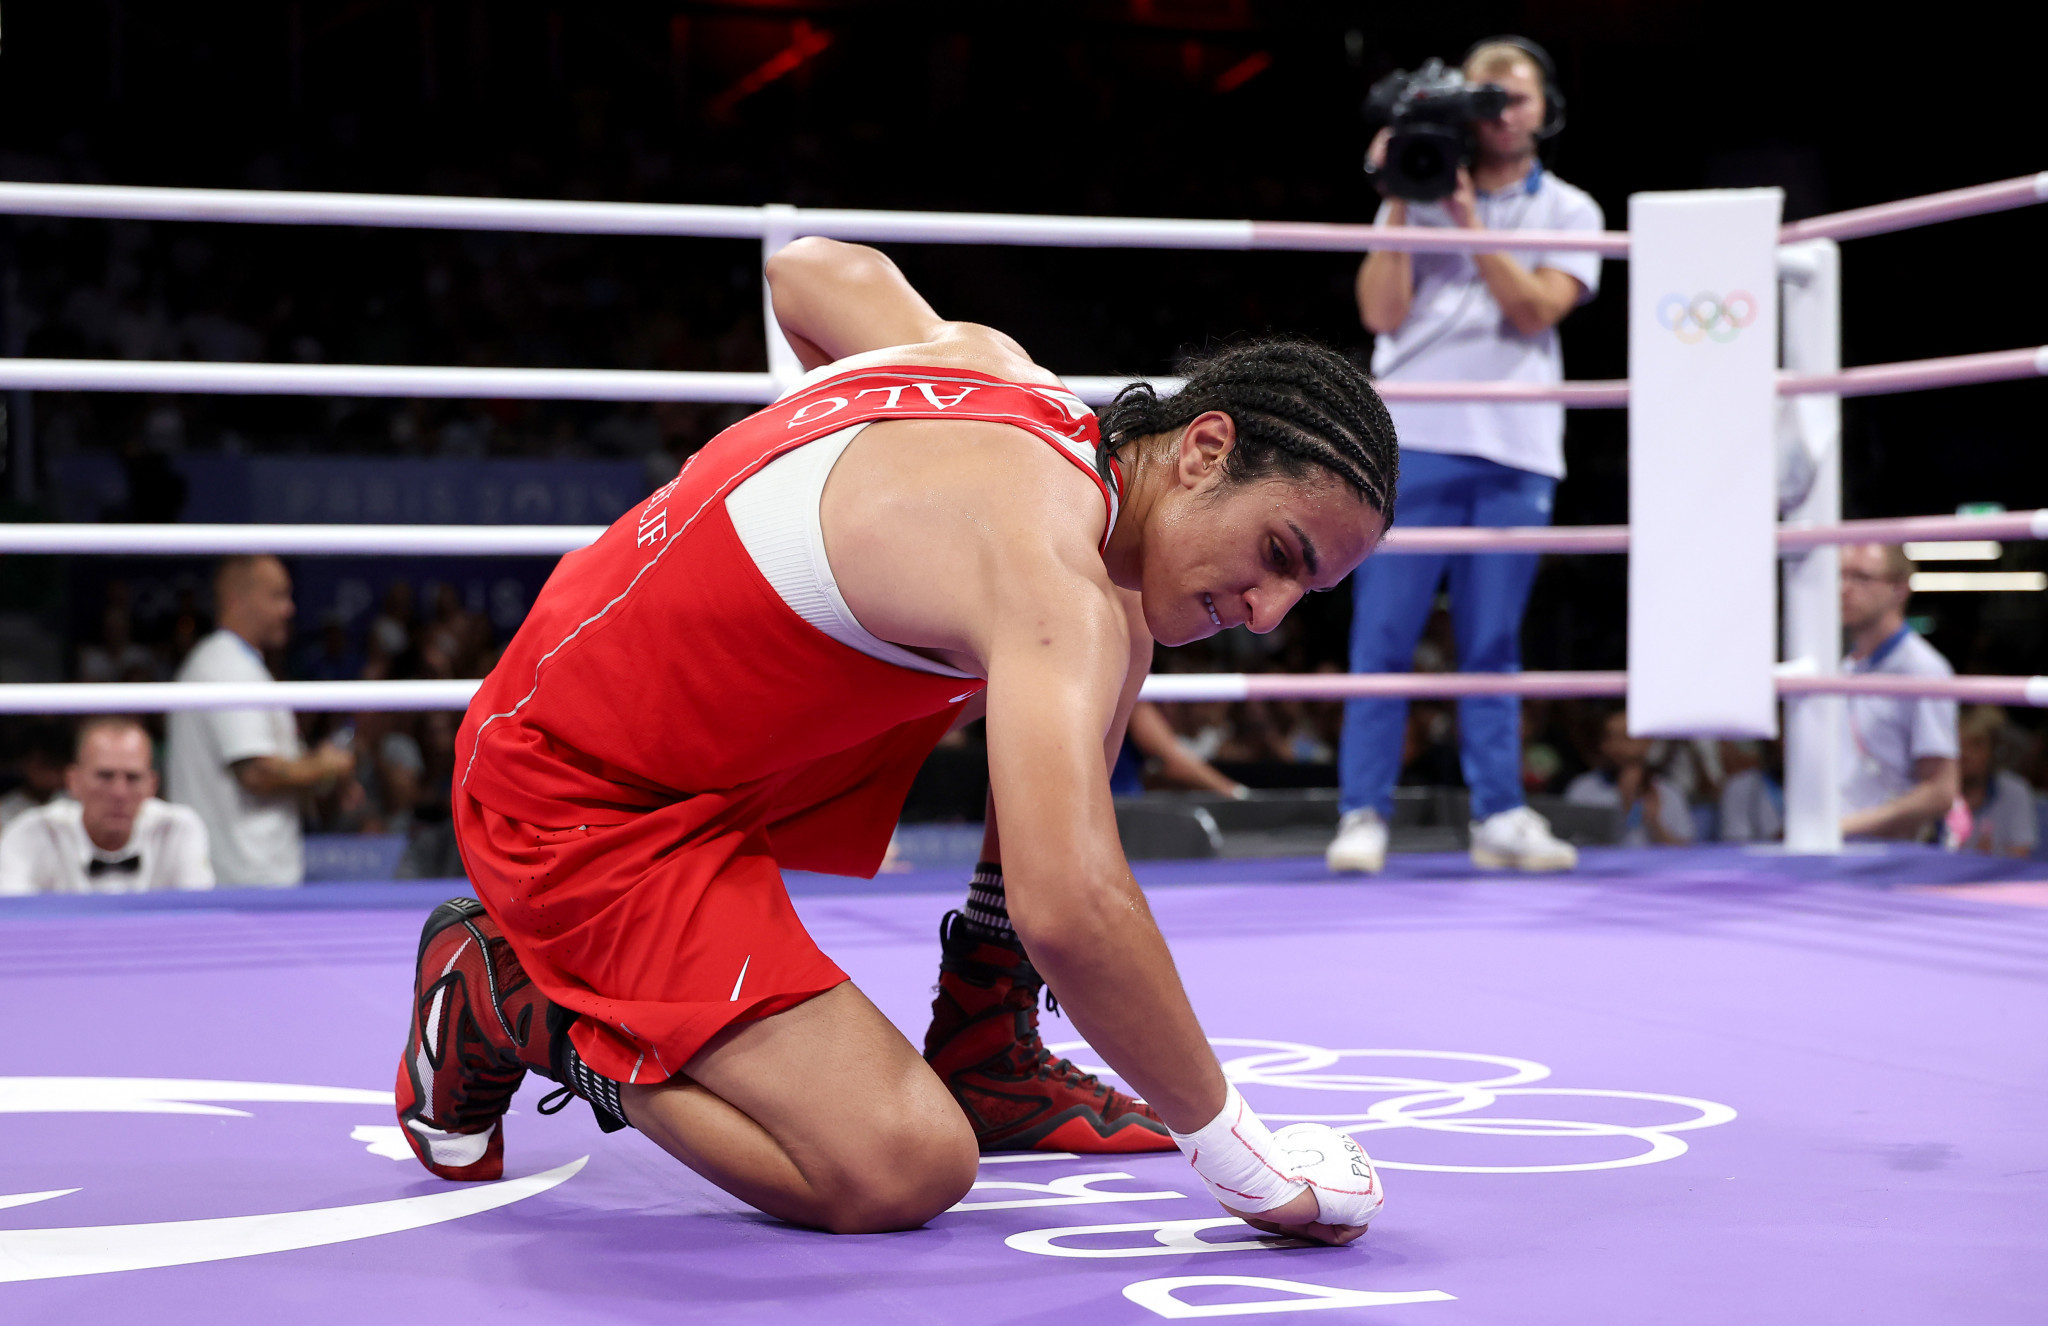 Amine Khelif assured herself the bronze medal. GETTY IMAGES